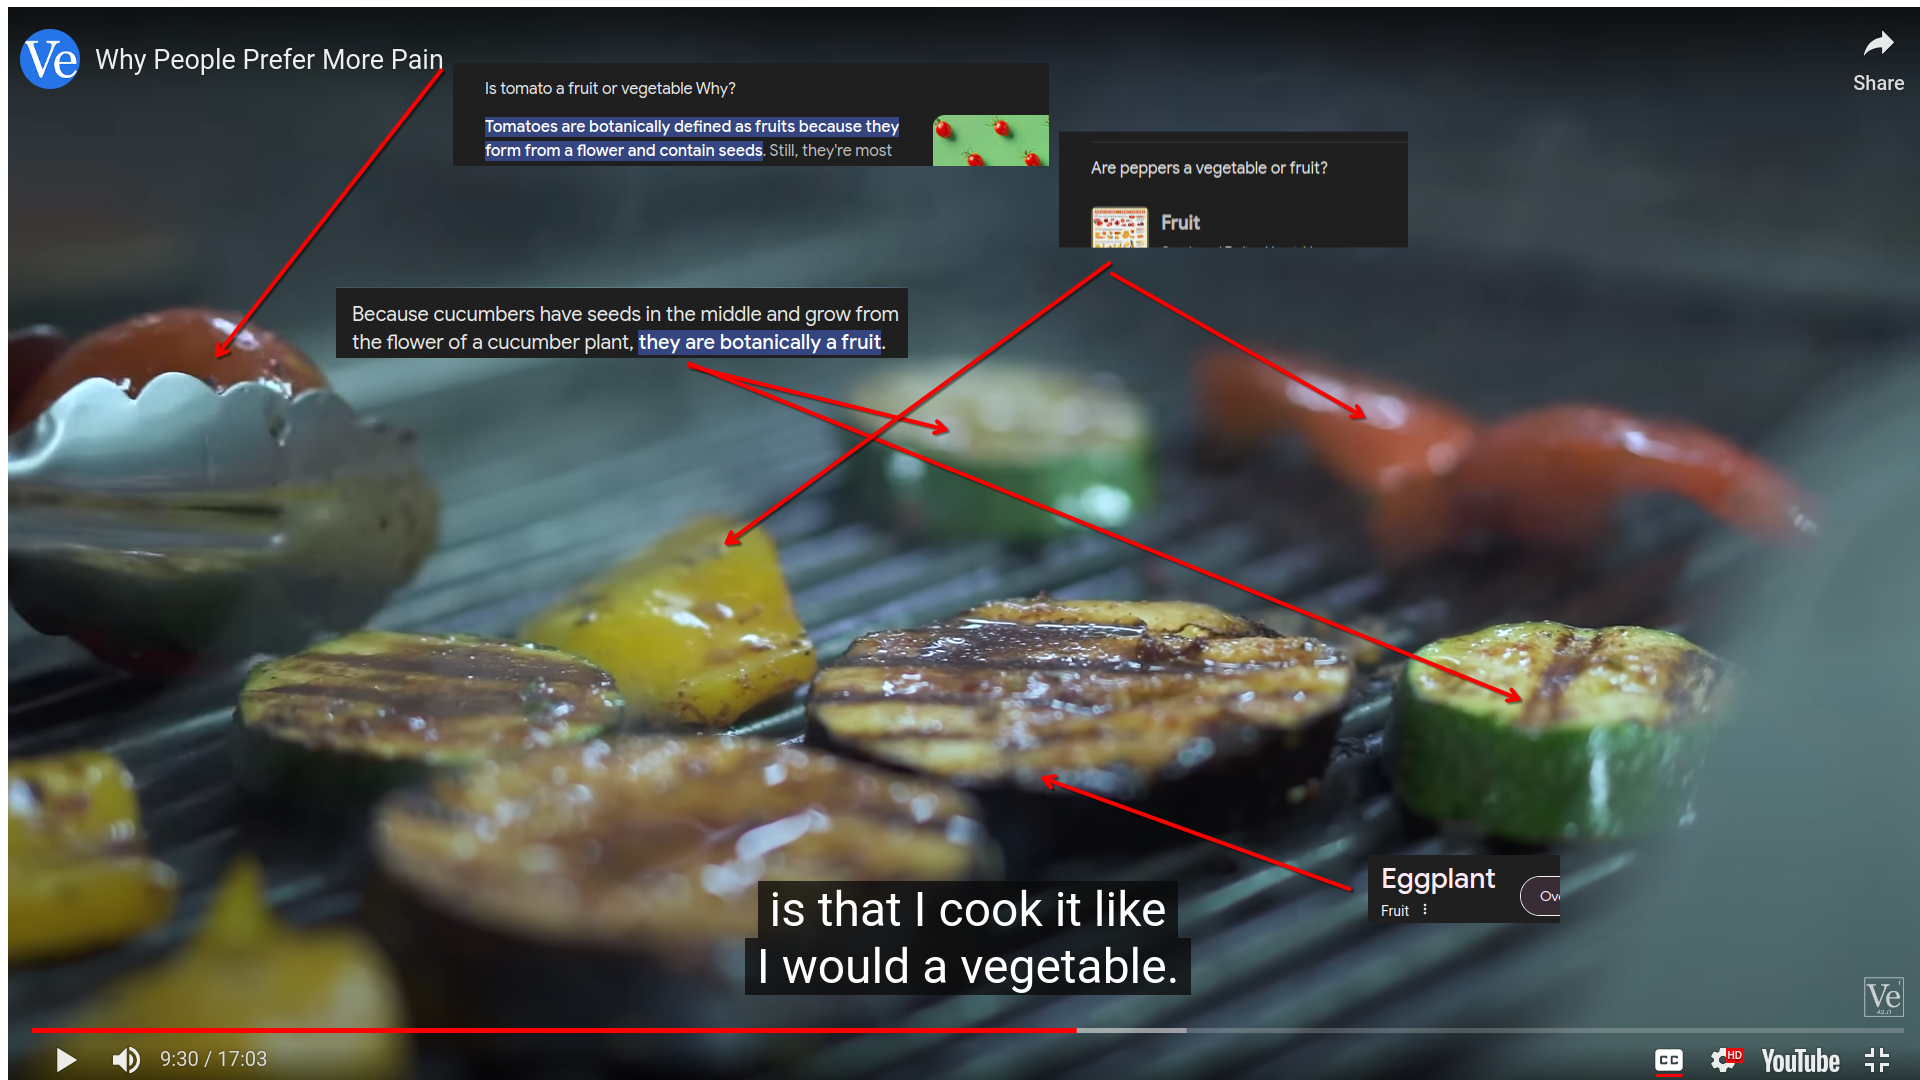 Trusted science youtuber veritasium makes the claim you cook eggplant like a vegtable showing b-roll of only fruits being cooked